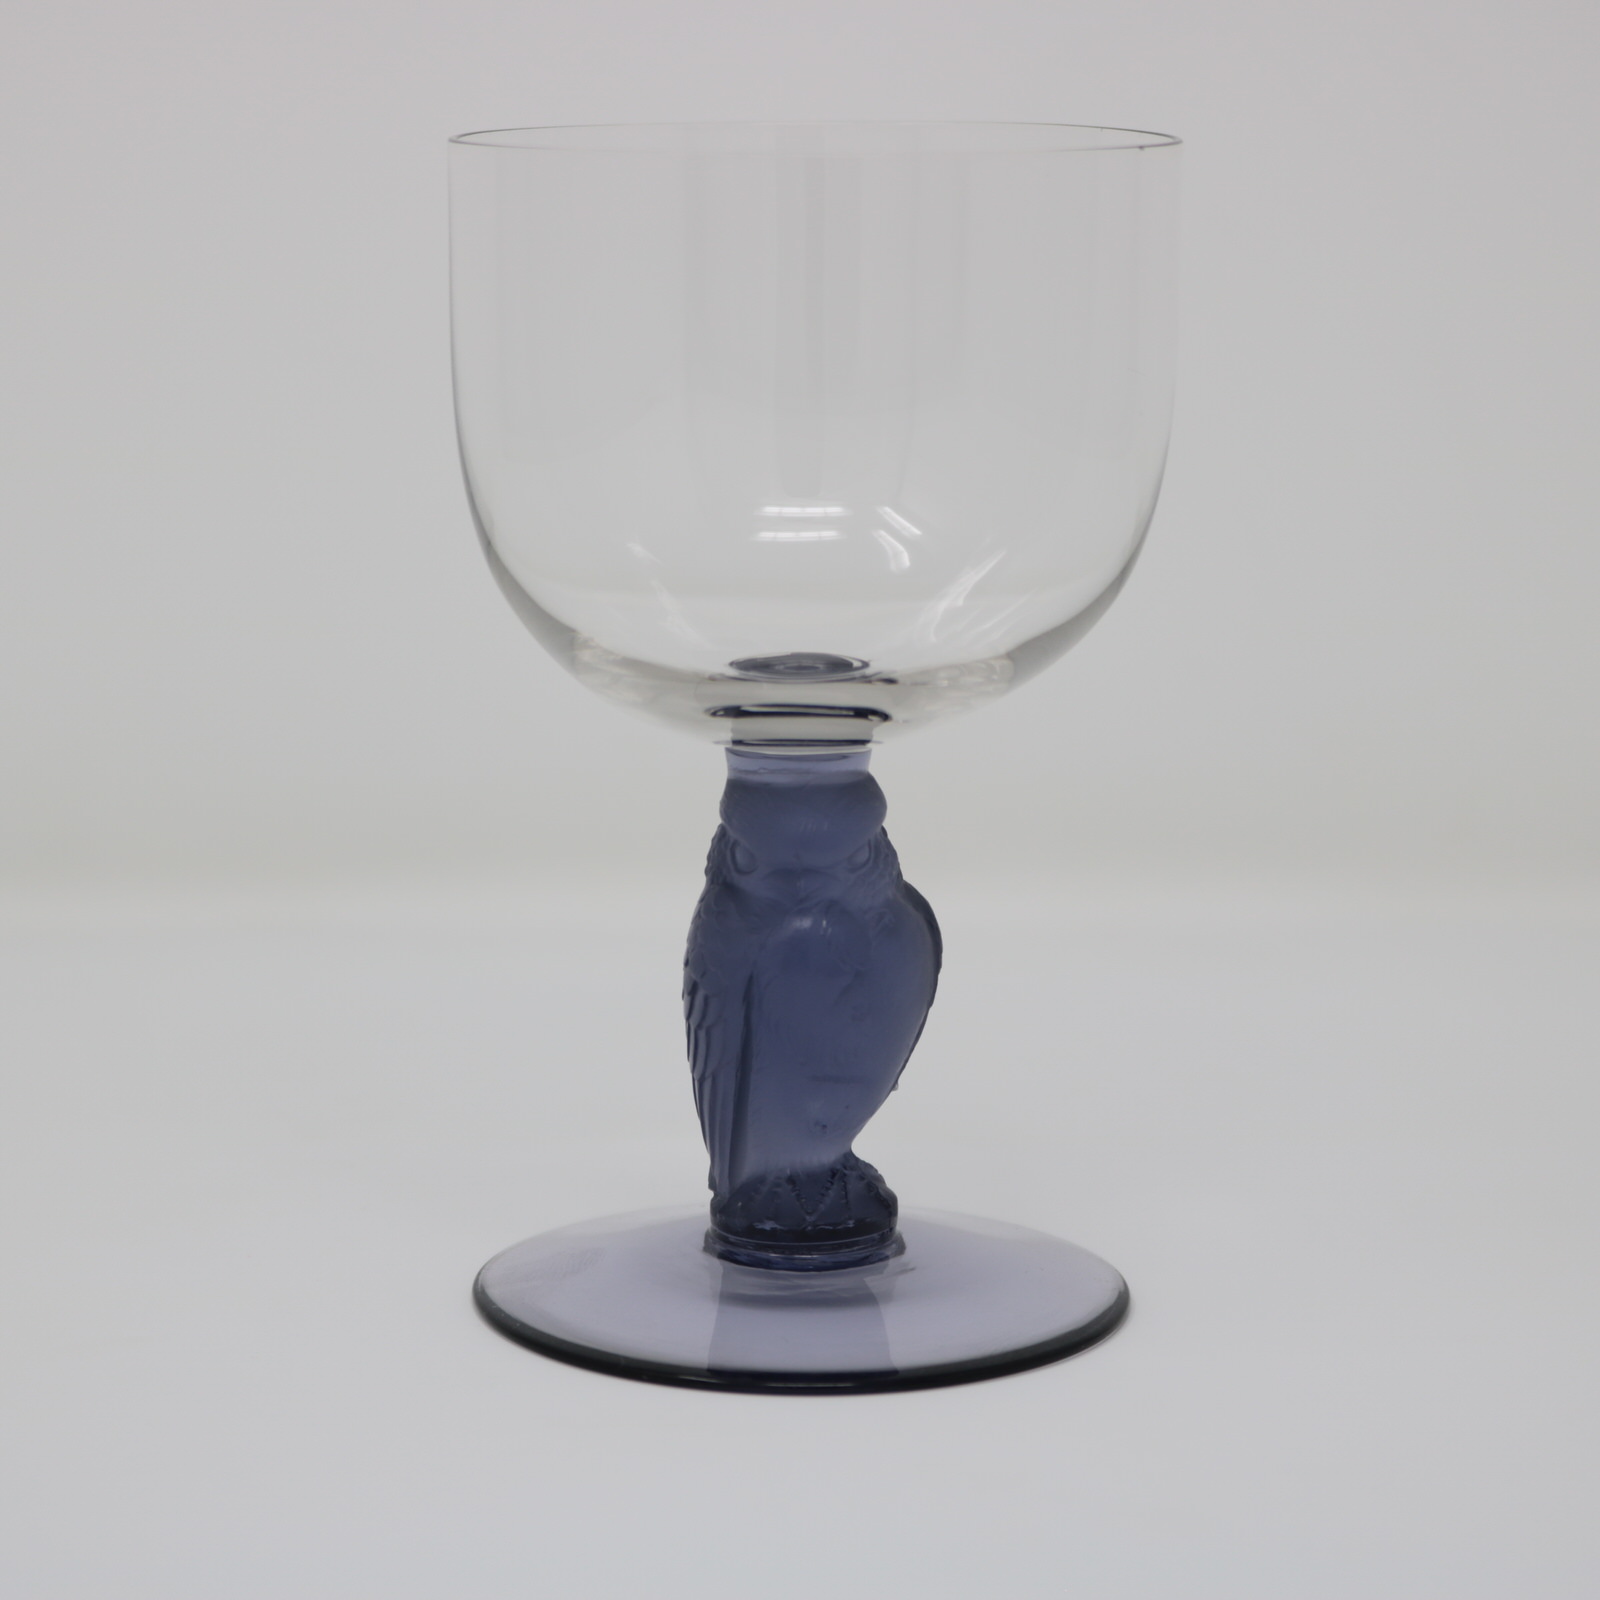 Rene Lalique Glass 'Rapace' Drinking Glass - Image 2 of 9